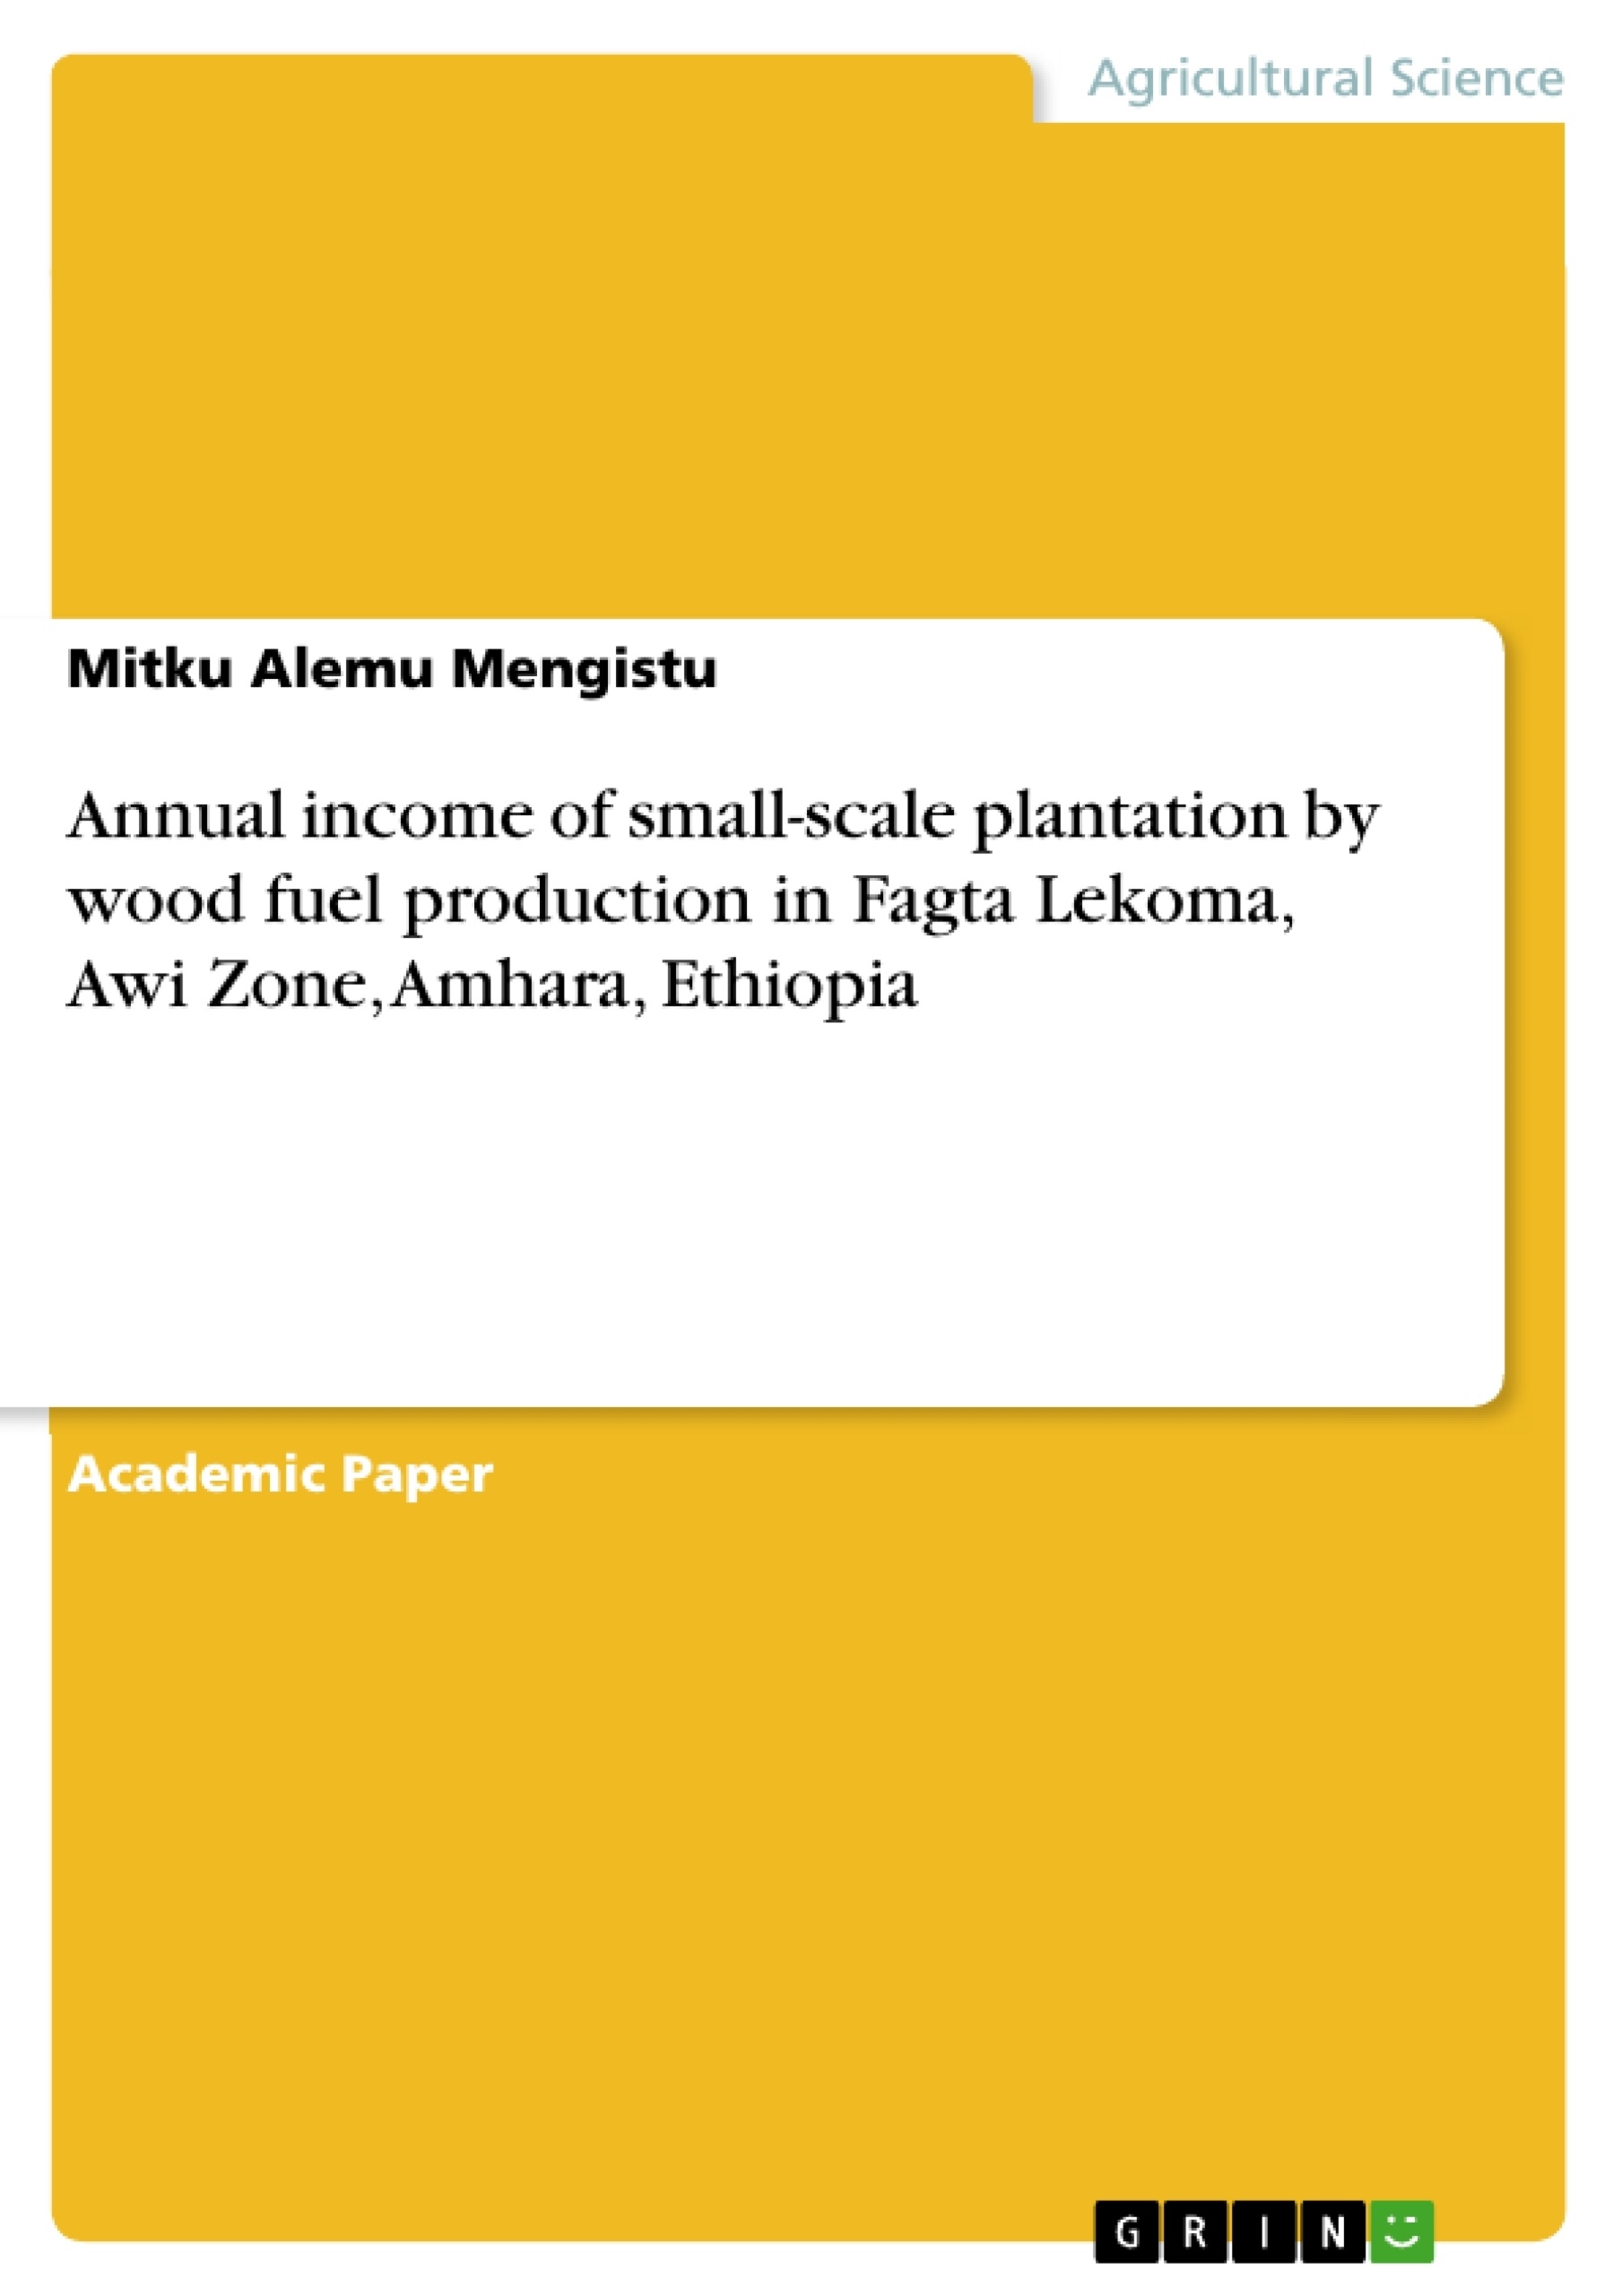 Titre: Annual income of small-scale plantation by wood fuel production in Fagta Lekoma, Awi Zone, Amhara, Ethiopia